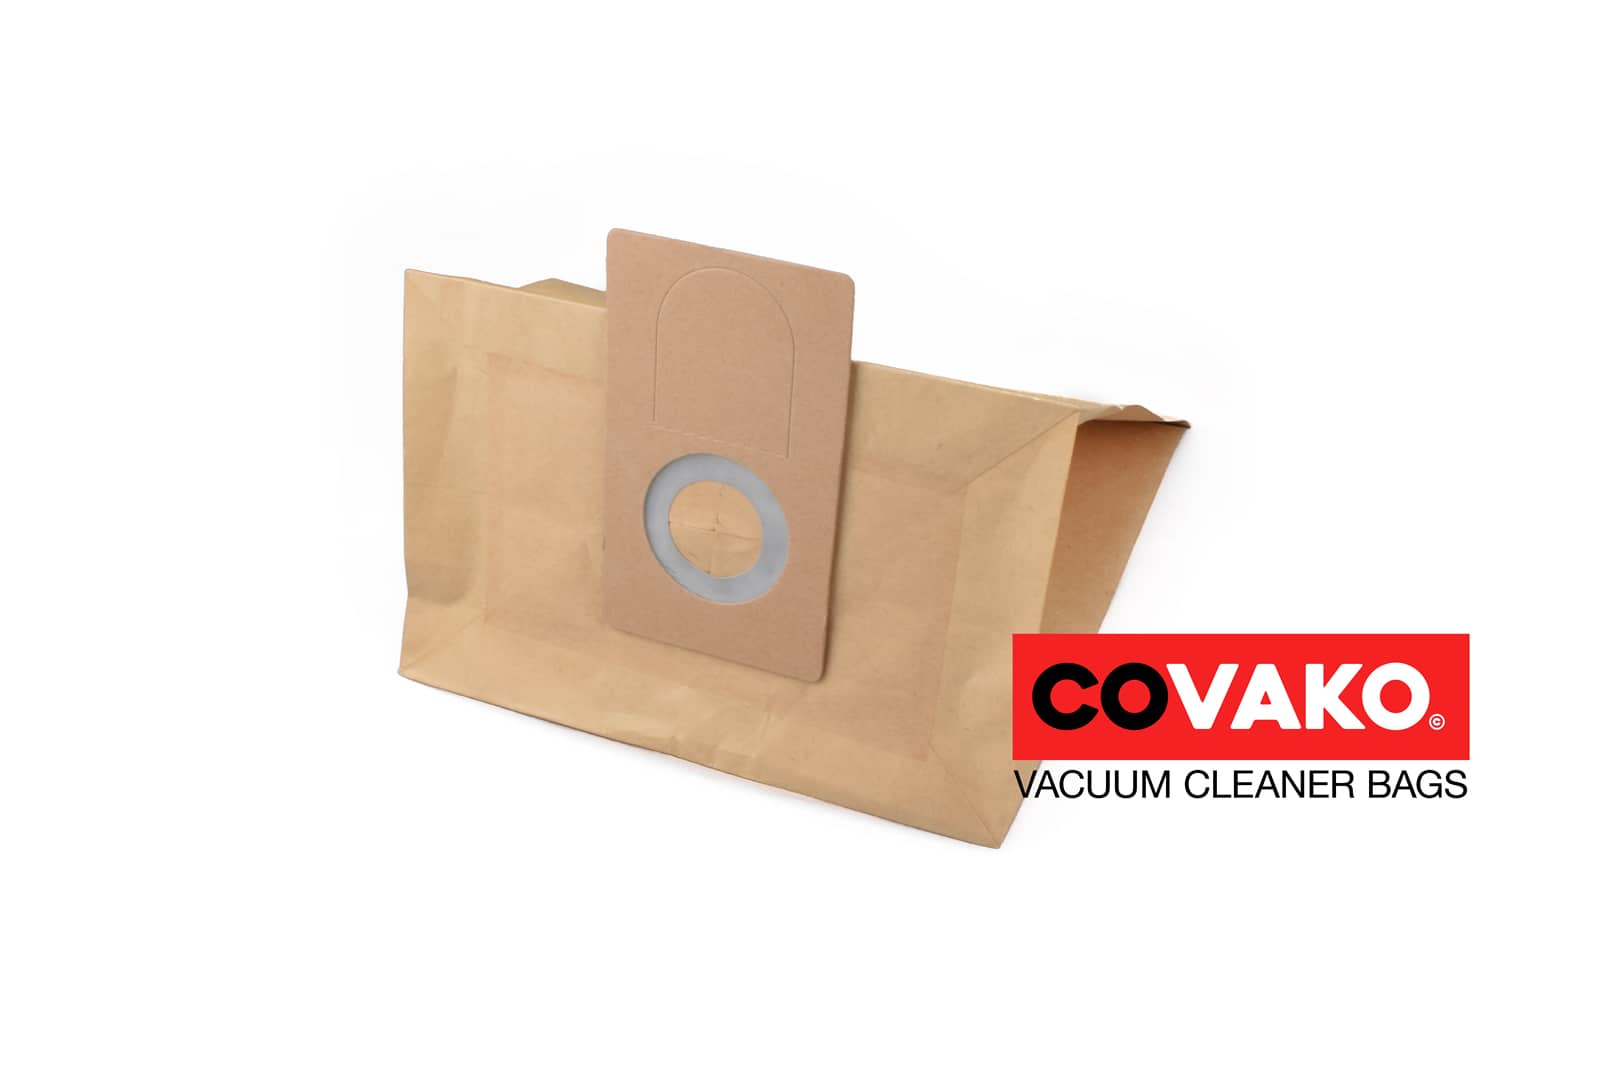 Oehme Otto S2 / Paper - Oehme Otto vacuum cleaner bags